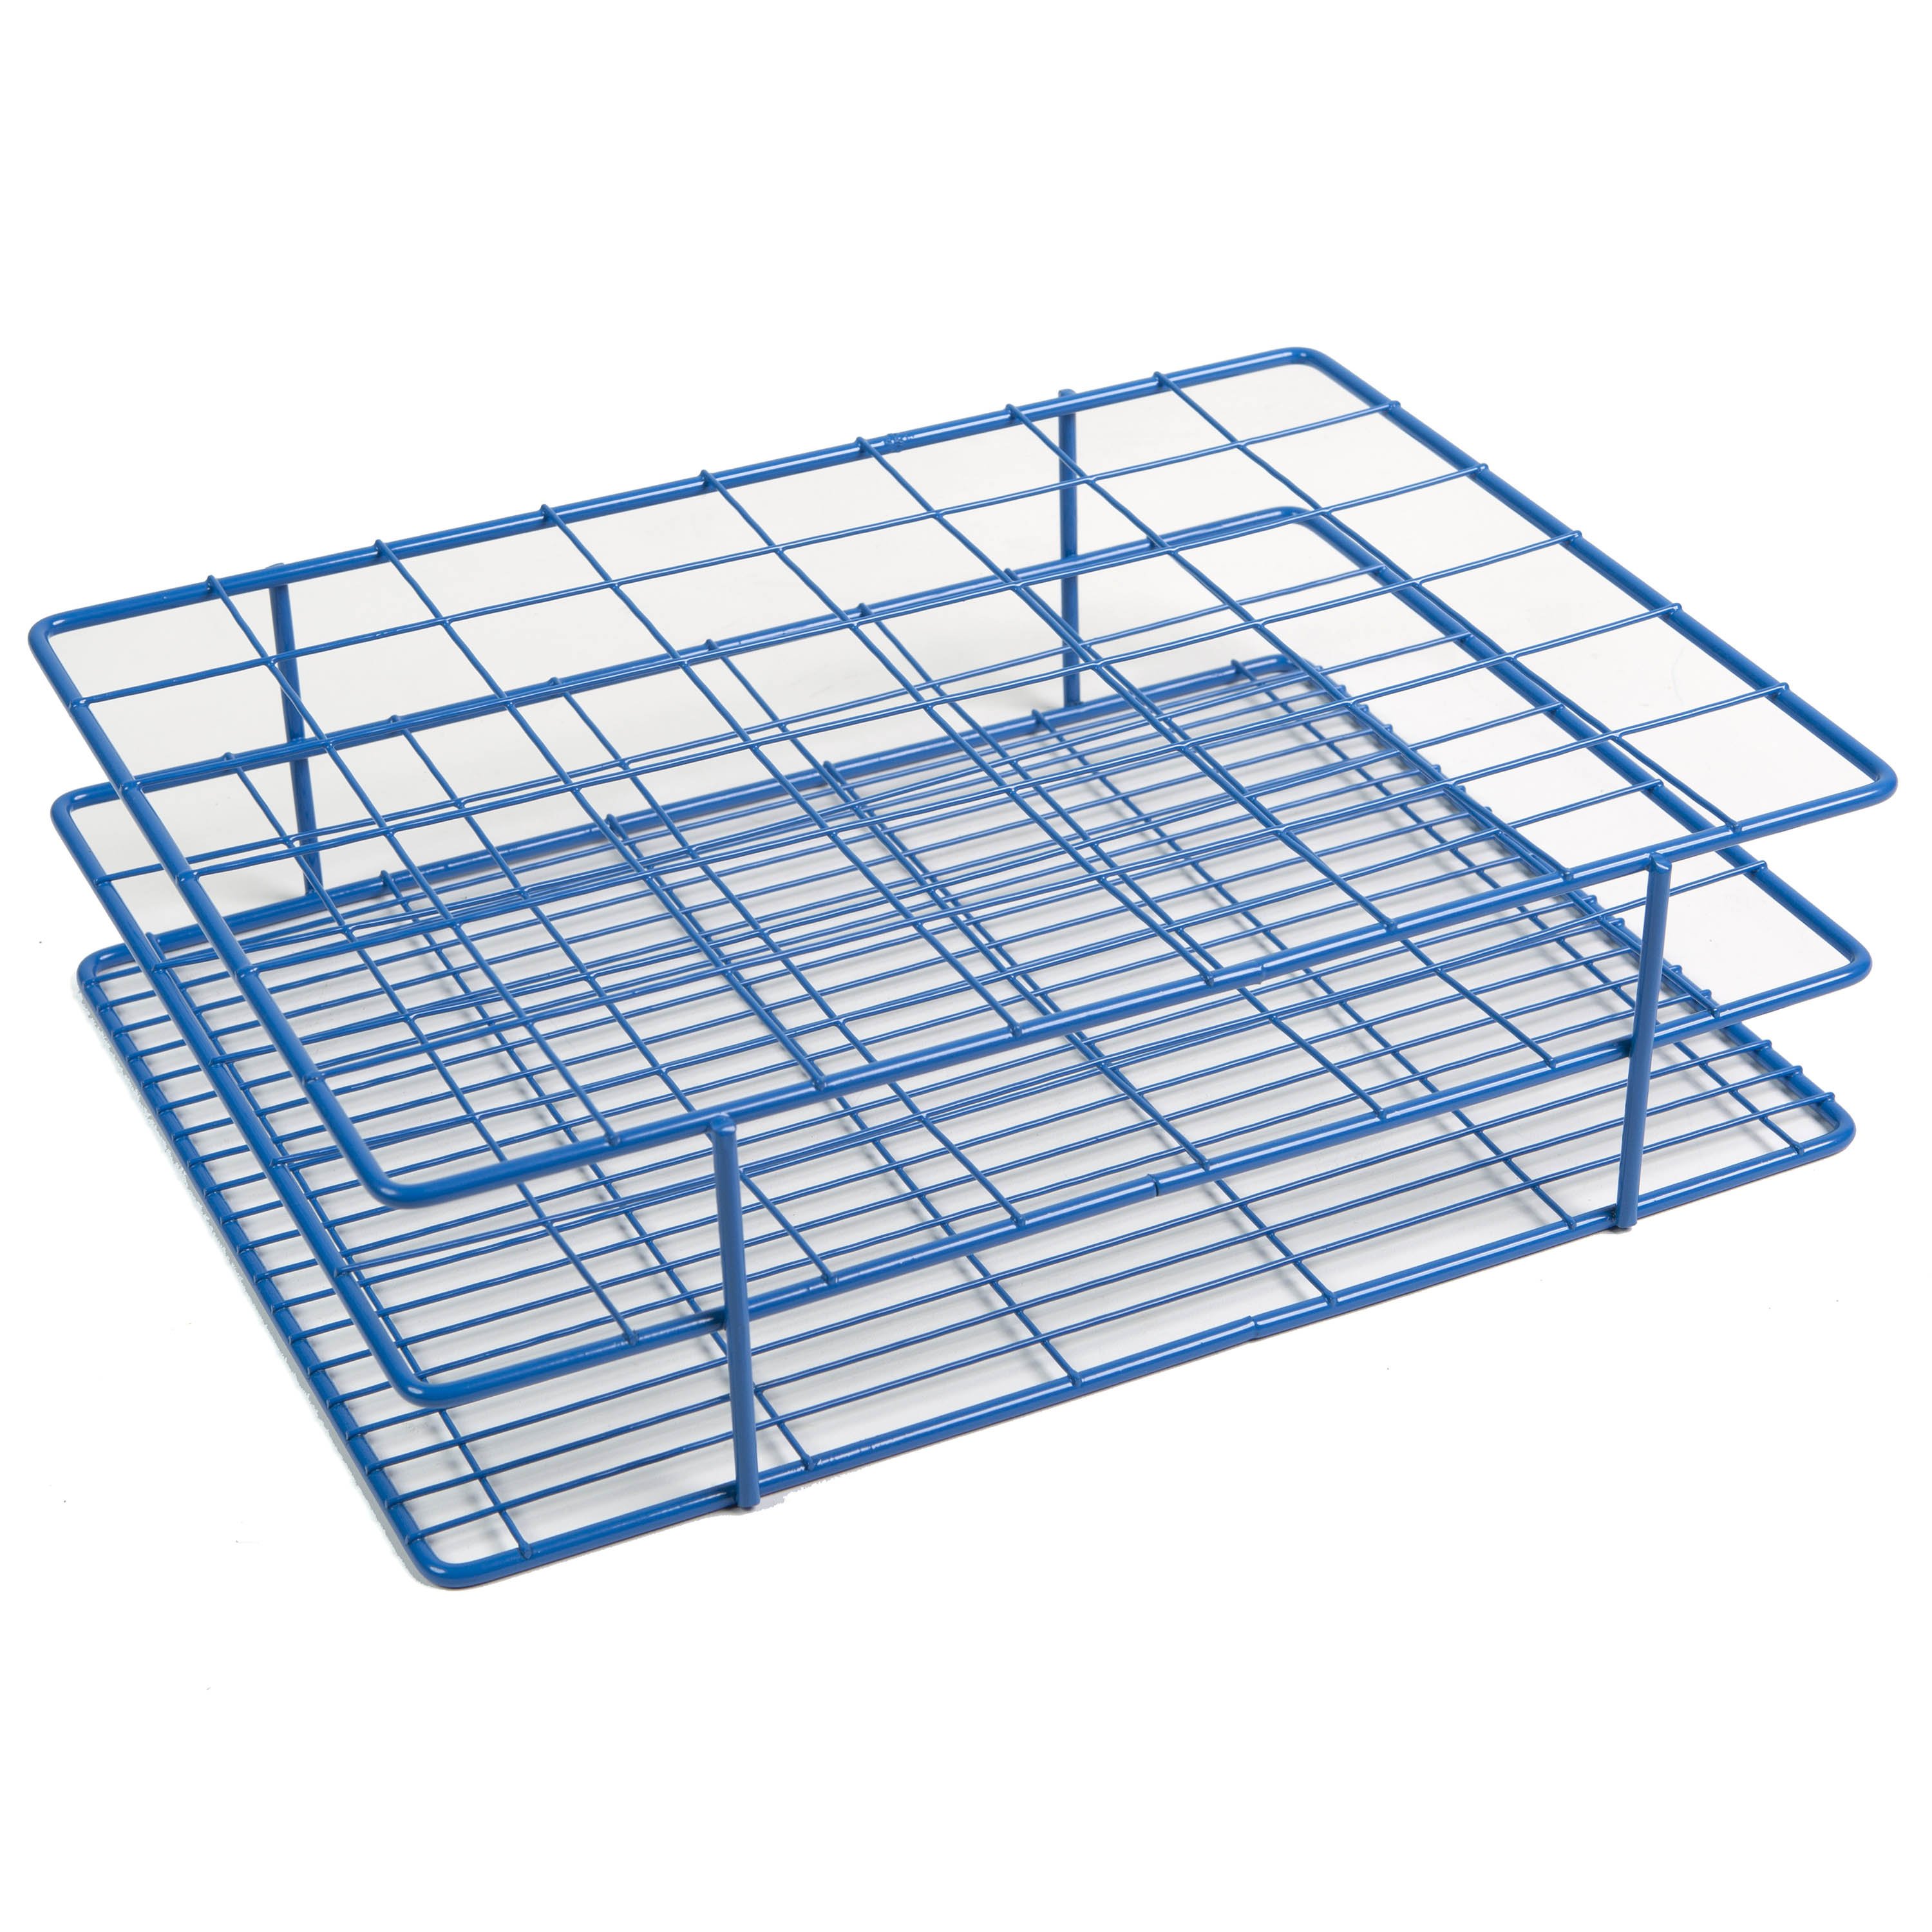 Coated Wire Rack - Fits 30-40mm Tubes, 48-Well, Blue